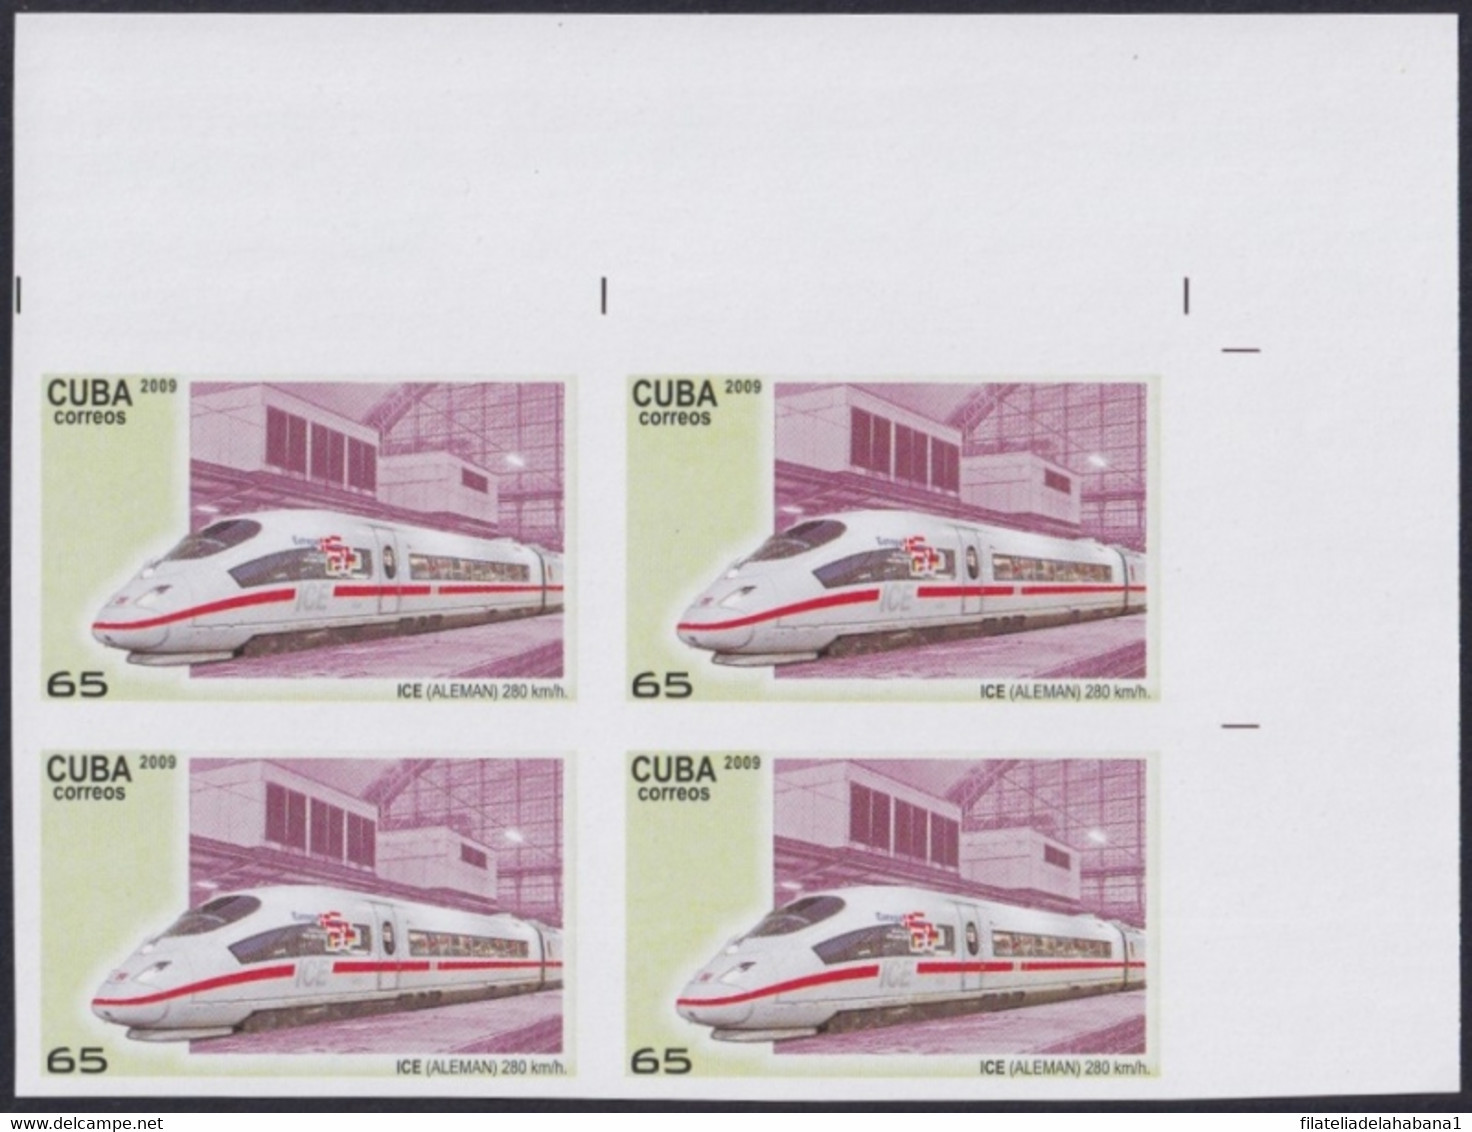 2009.445 CUBA 2009 65c MNH IMPERFORATED PROOF FAST RAILROAD GERMANY ICE. - Imperforates, Proofs & Errors